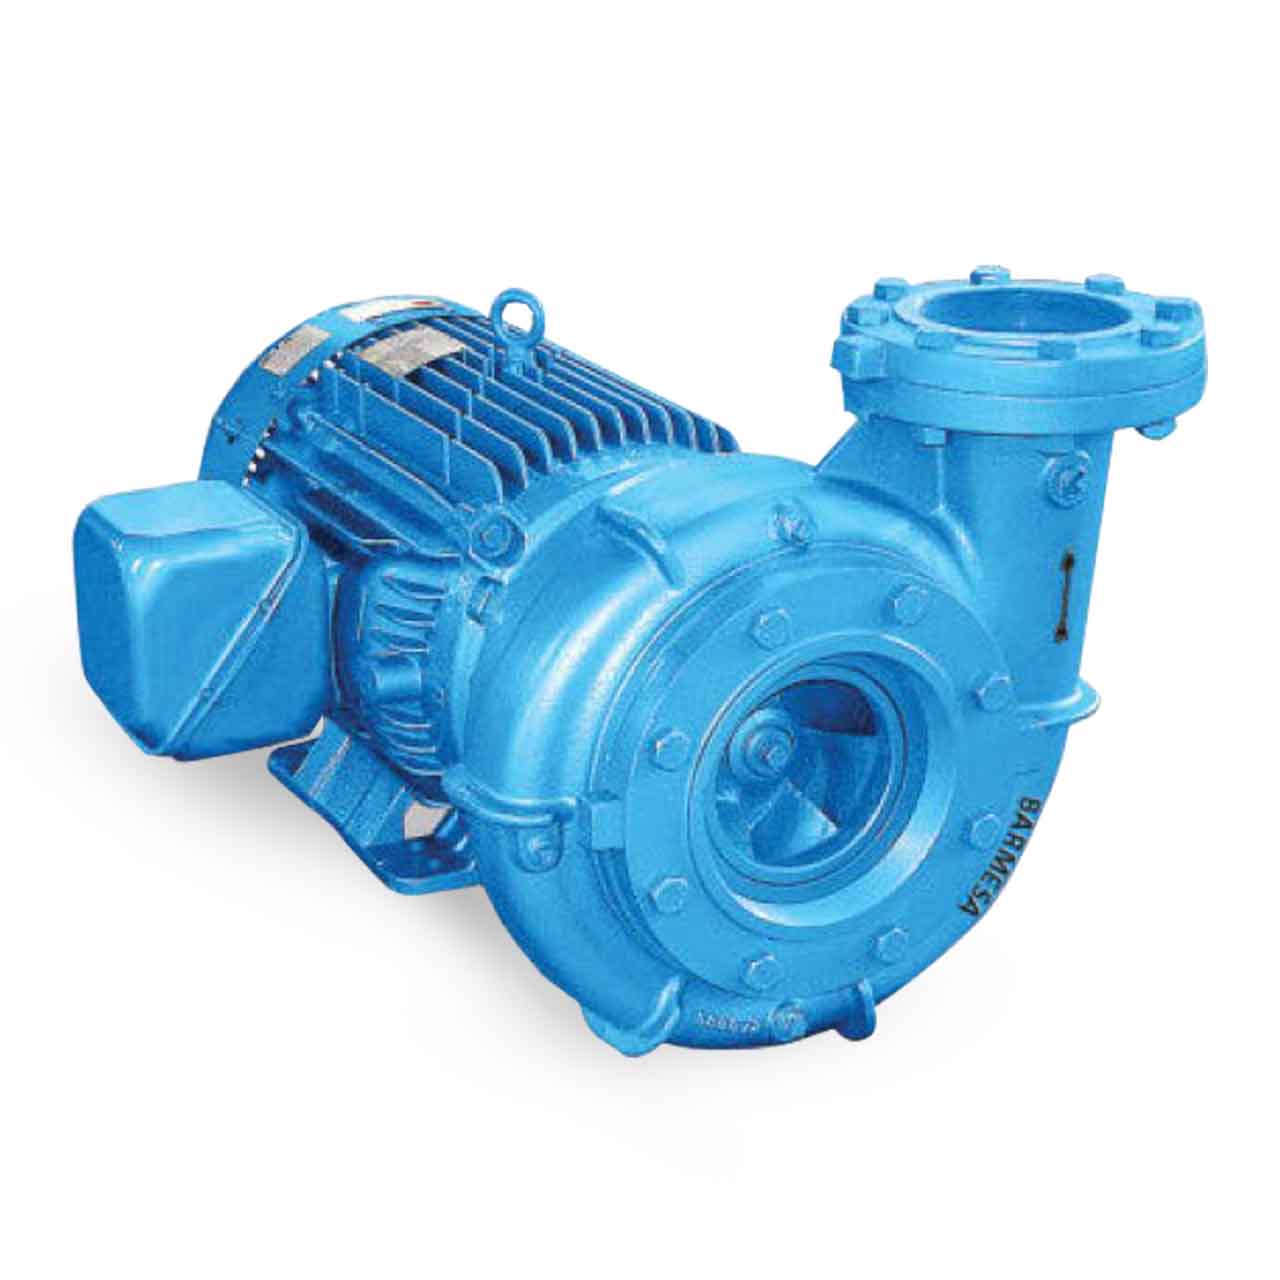 All End-Suction Centrifugal Pumps